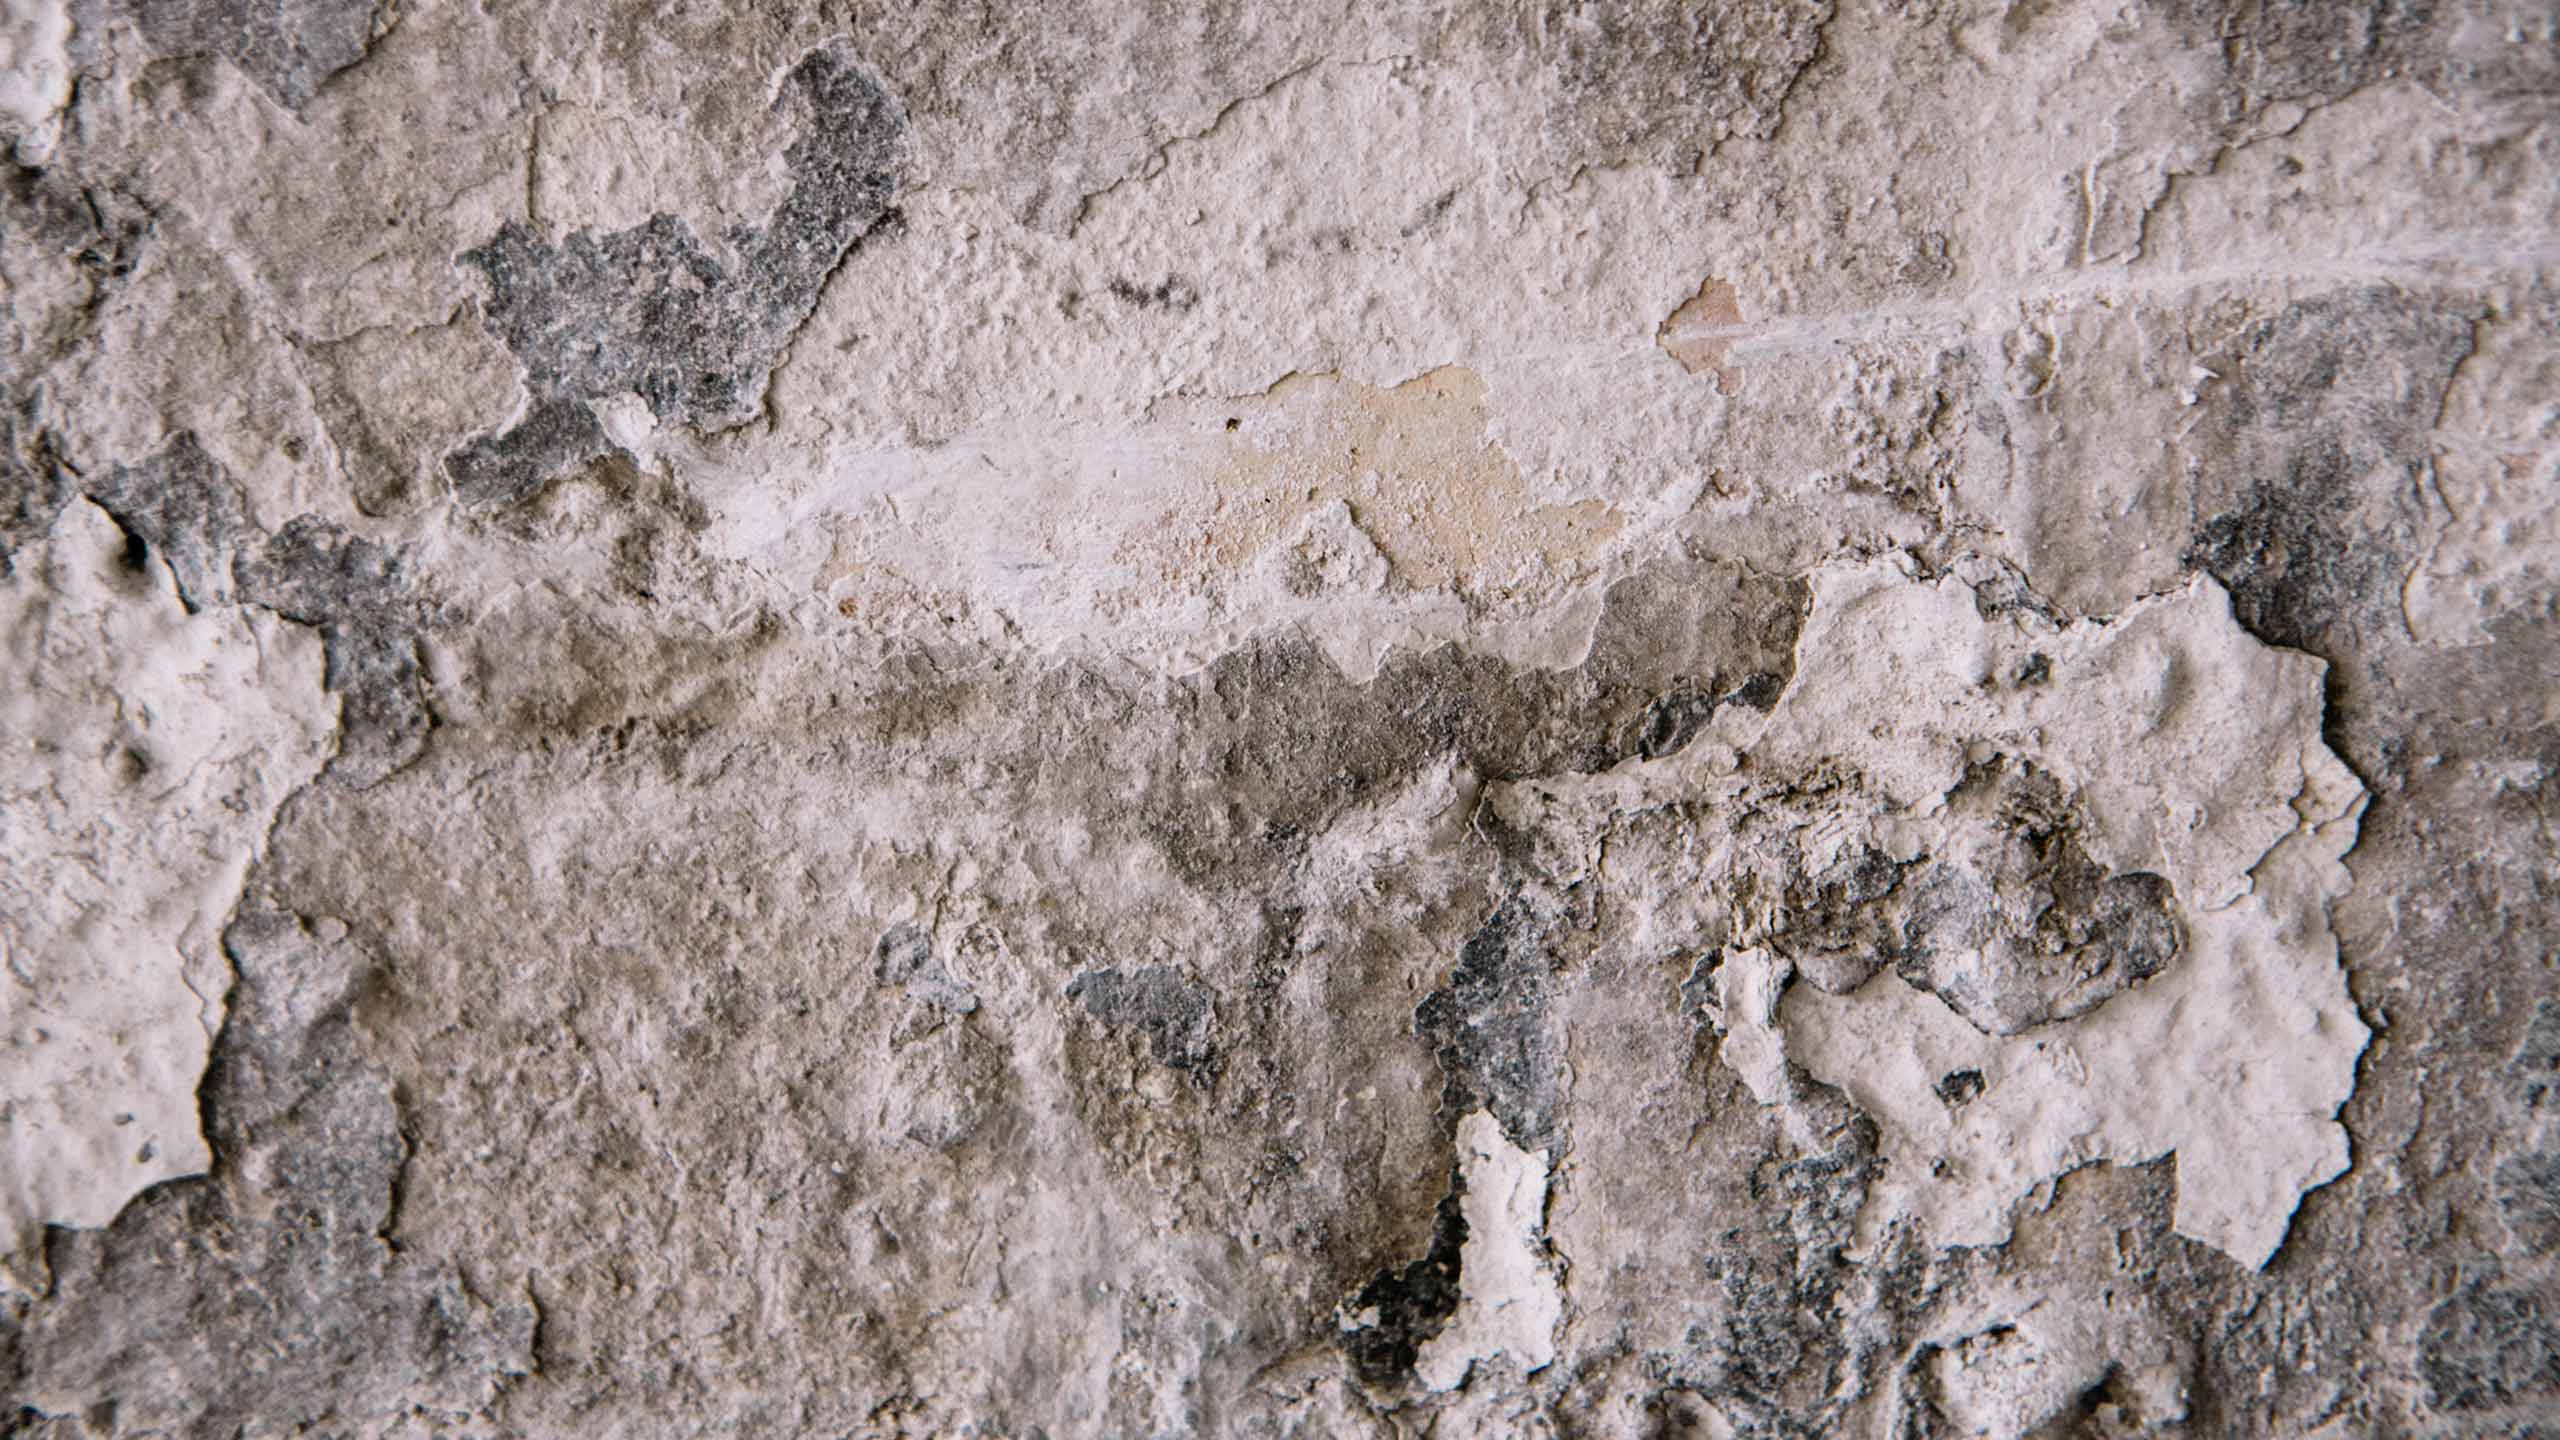 Interior wall with a cracked, dry textured surface.